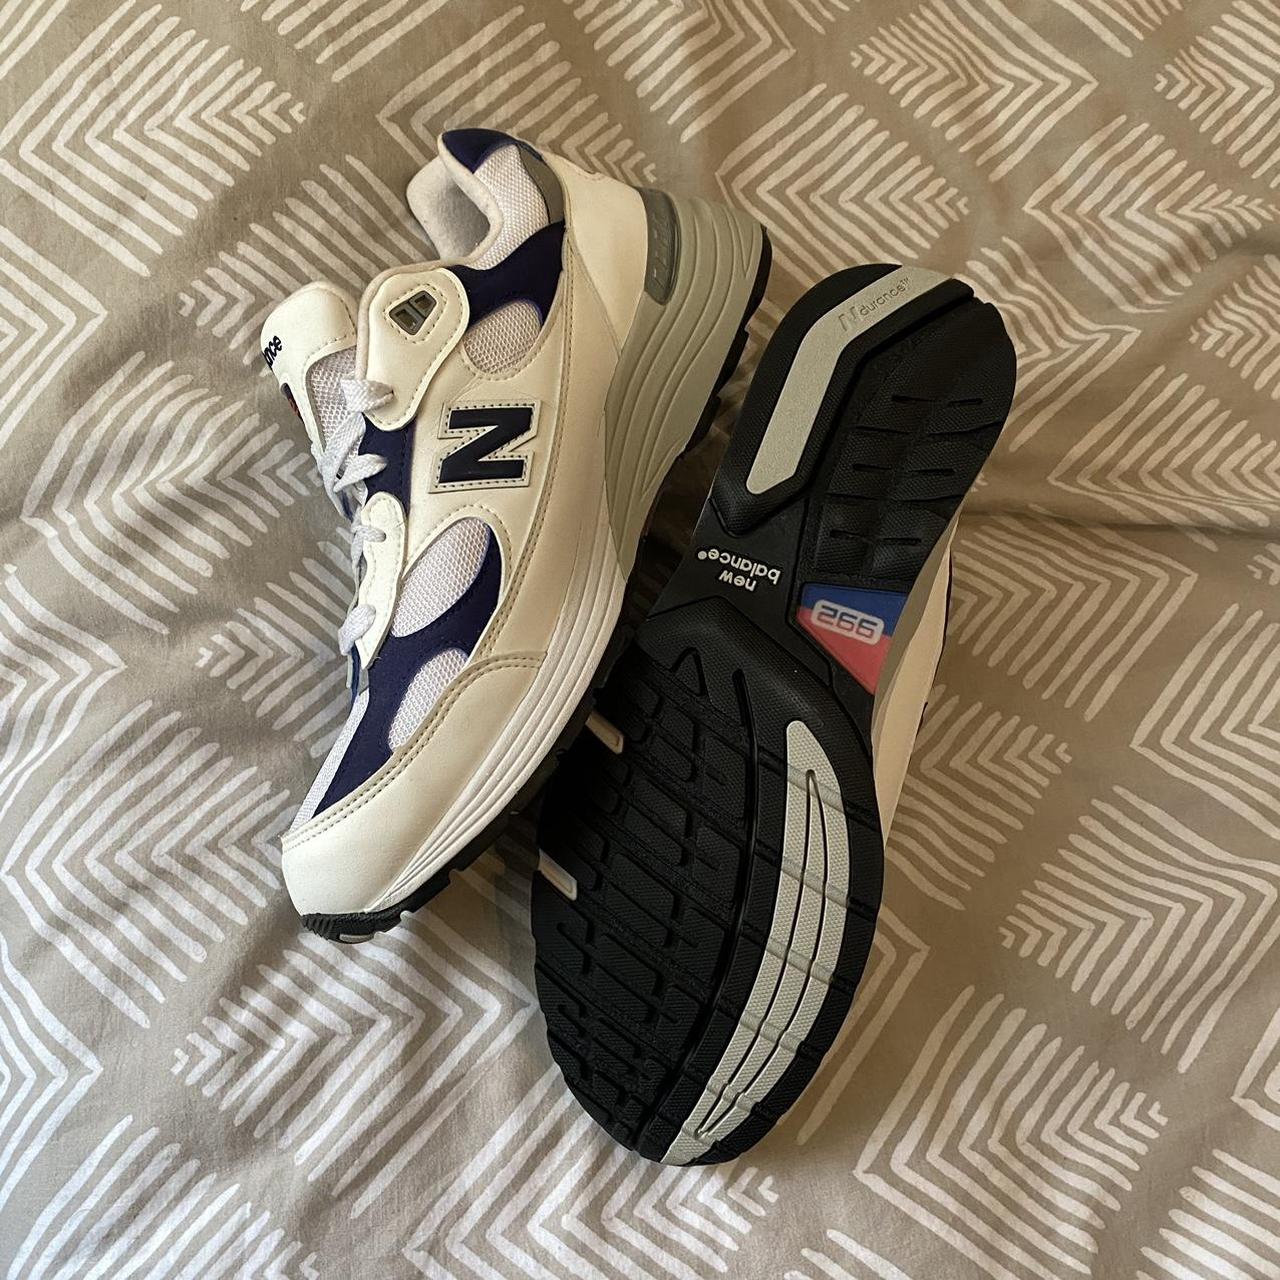 New Balance 992 White/Navy - Message me with... - Depop